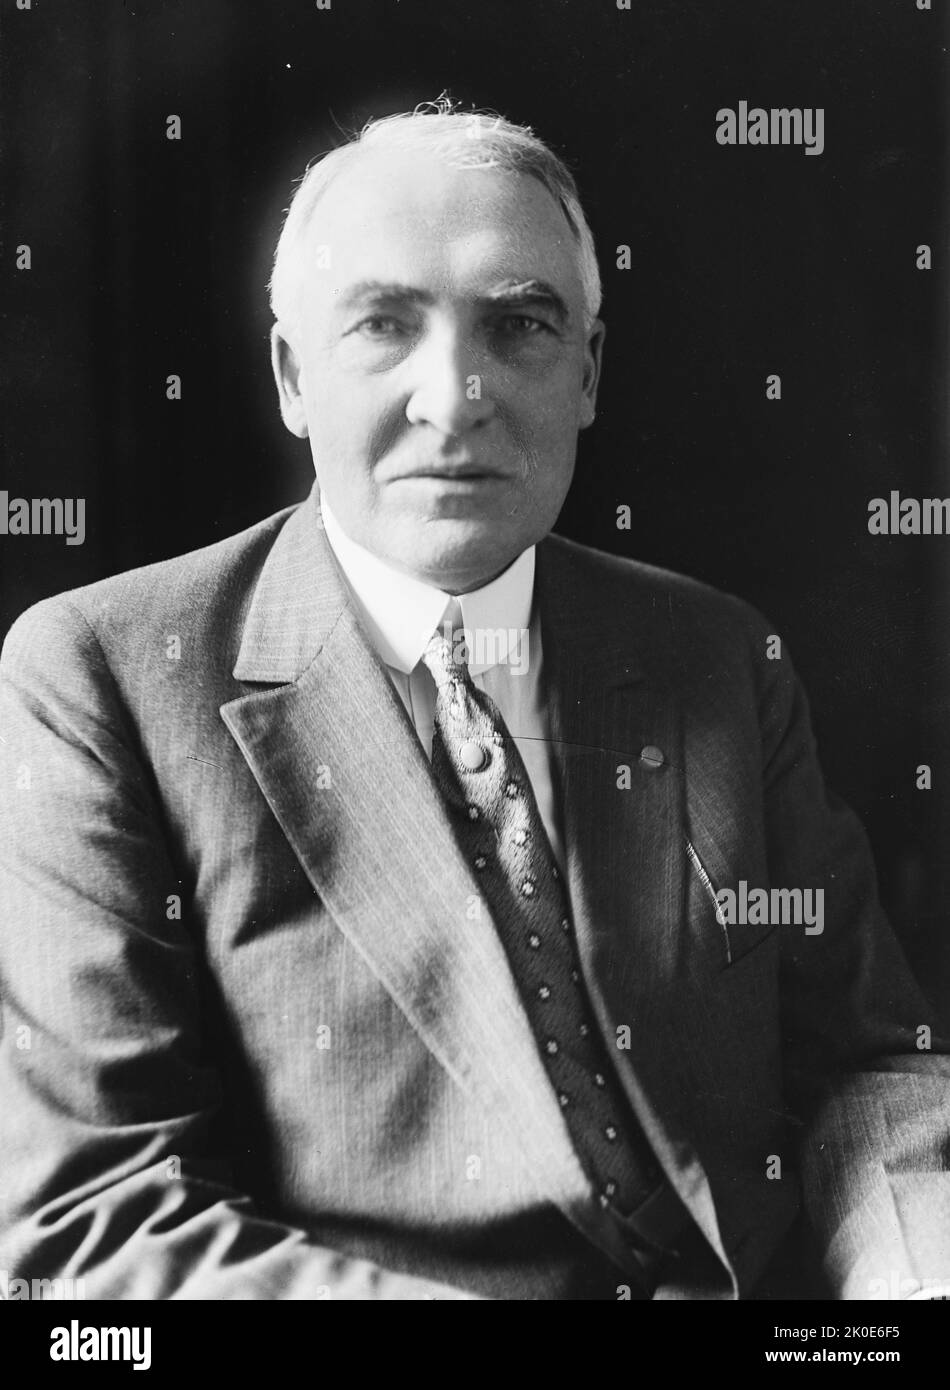 Warren Gamaliel Harding (November 2, 1865 - August 2, 1923) was the 29th president of the United States, serving from 1921 until his death in 1923. A member of the Republican Party. Stock Photo